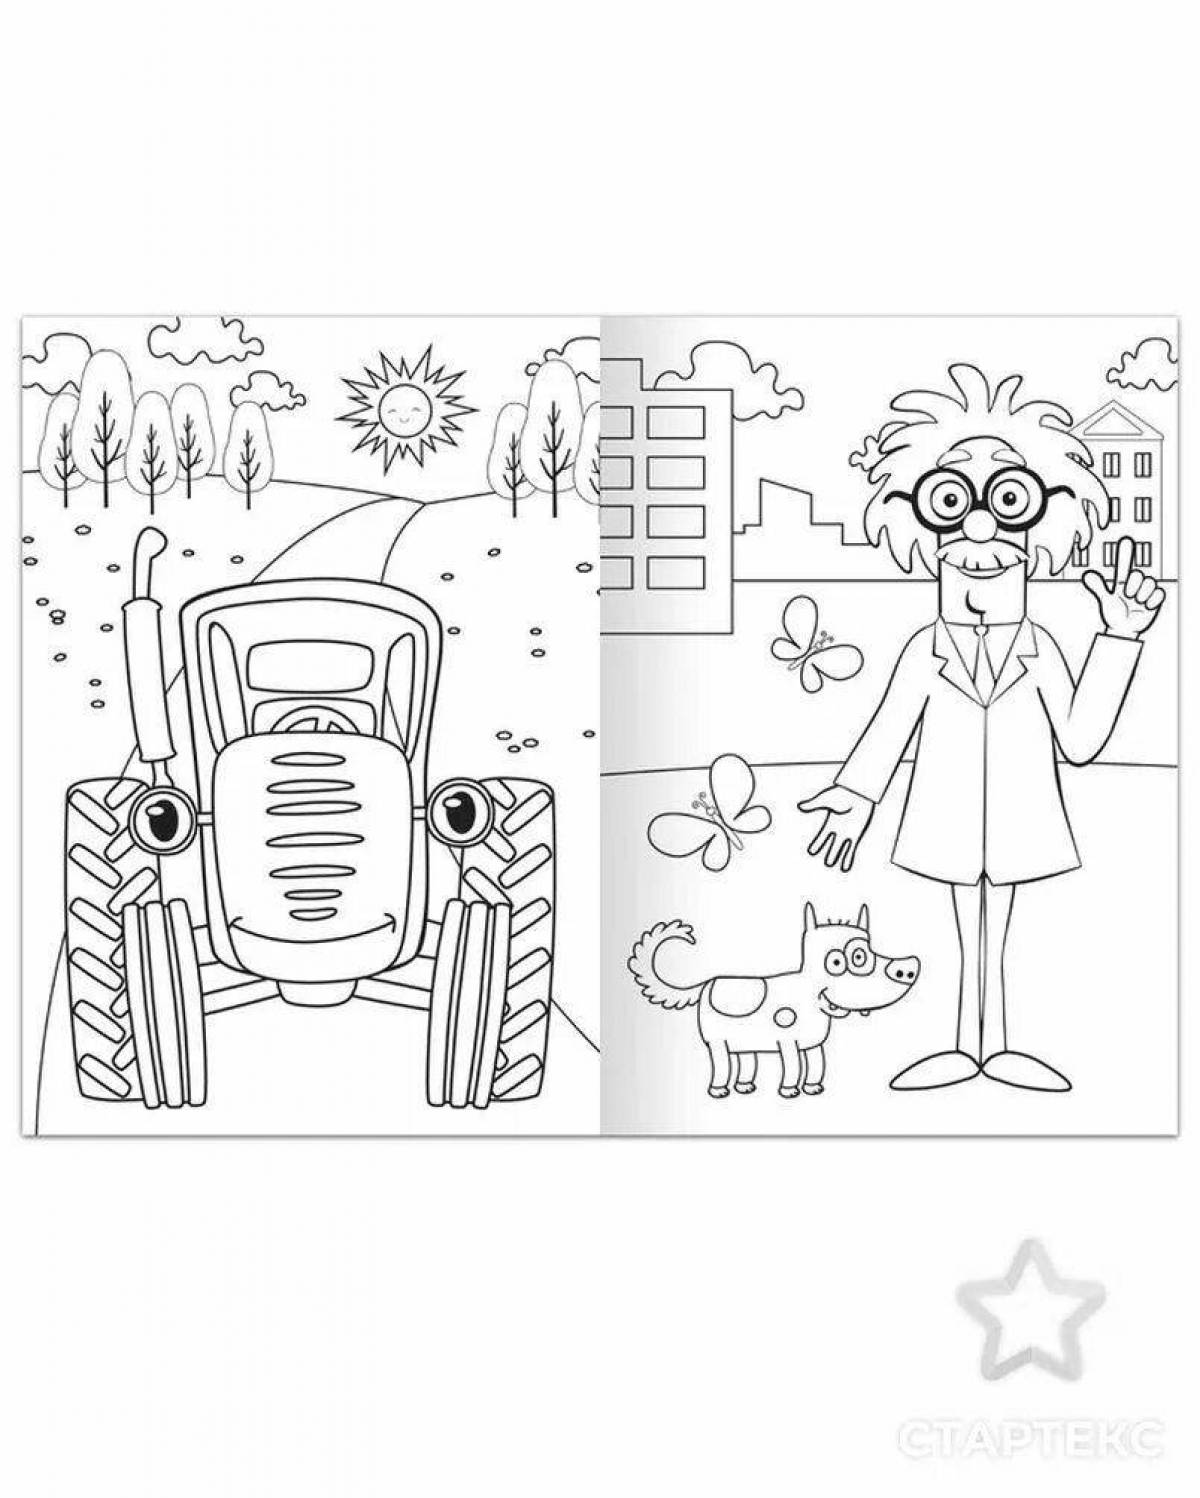 Stylish blue tractor seal coloring page